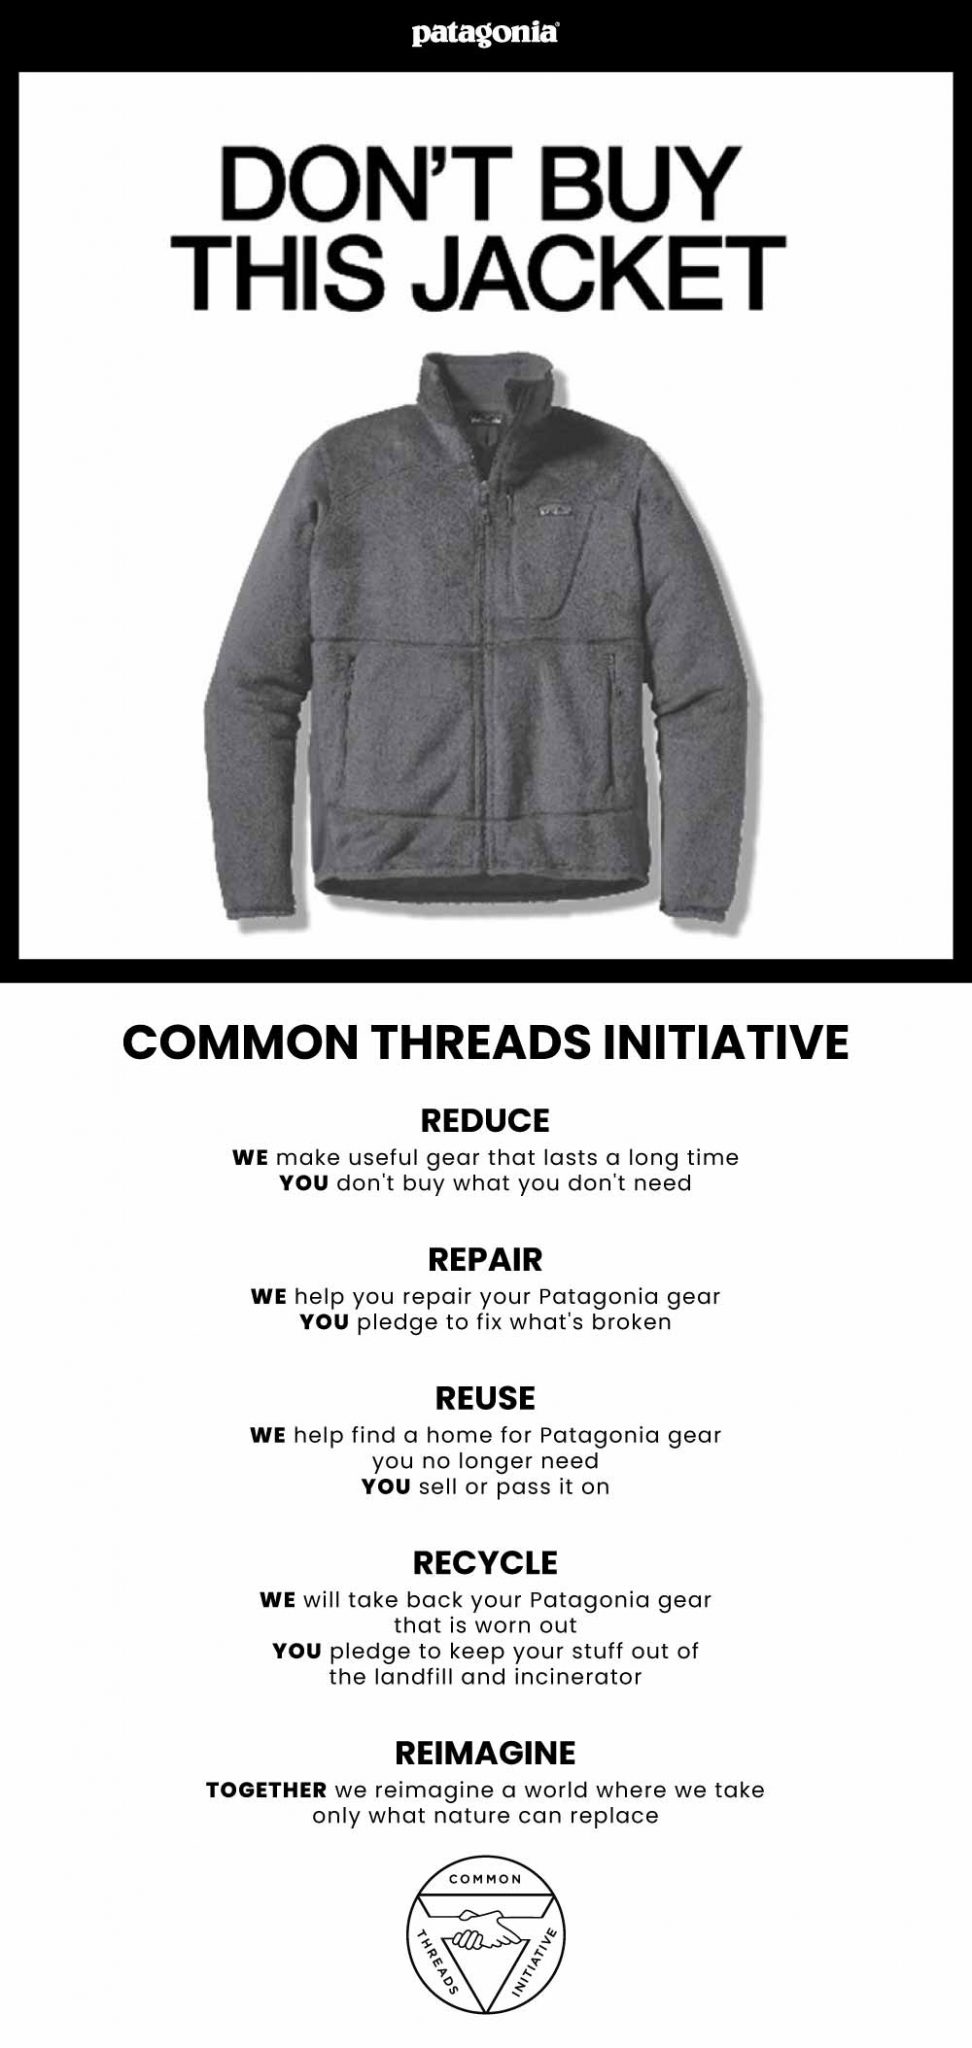 Brand Storytelling- Example of Patagonia's Don't buy this Jacket Campaign